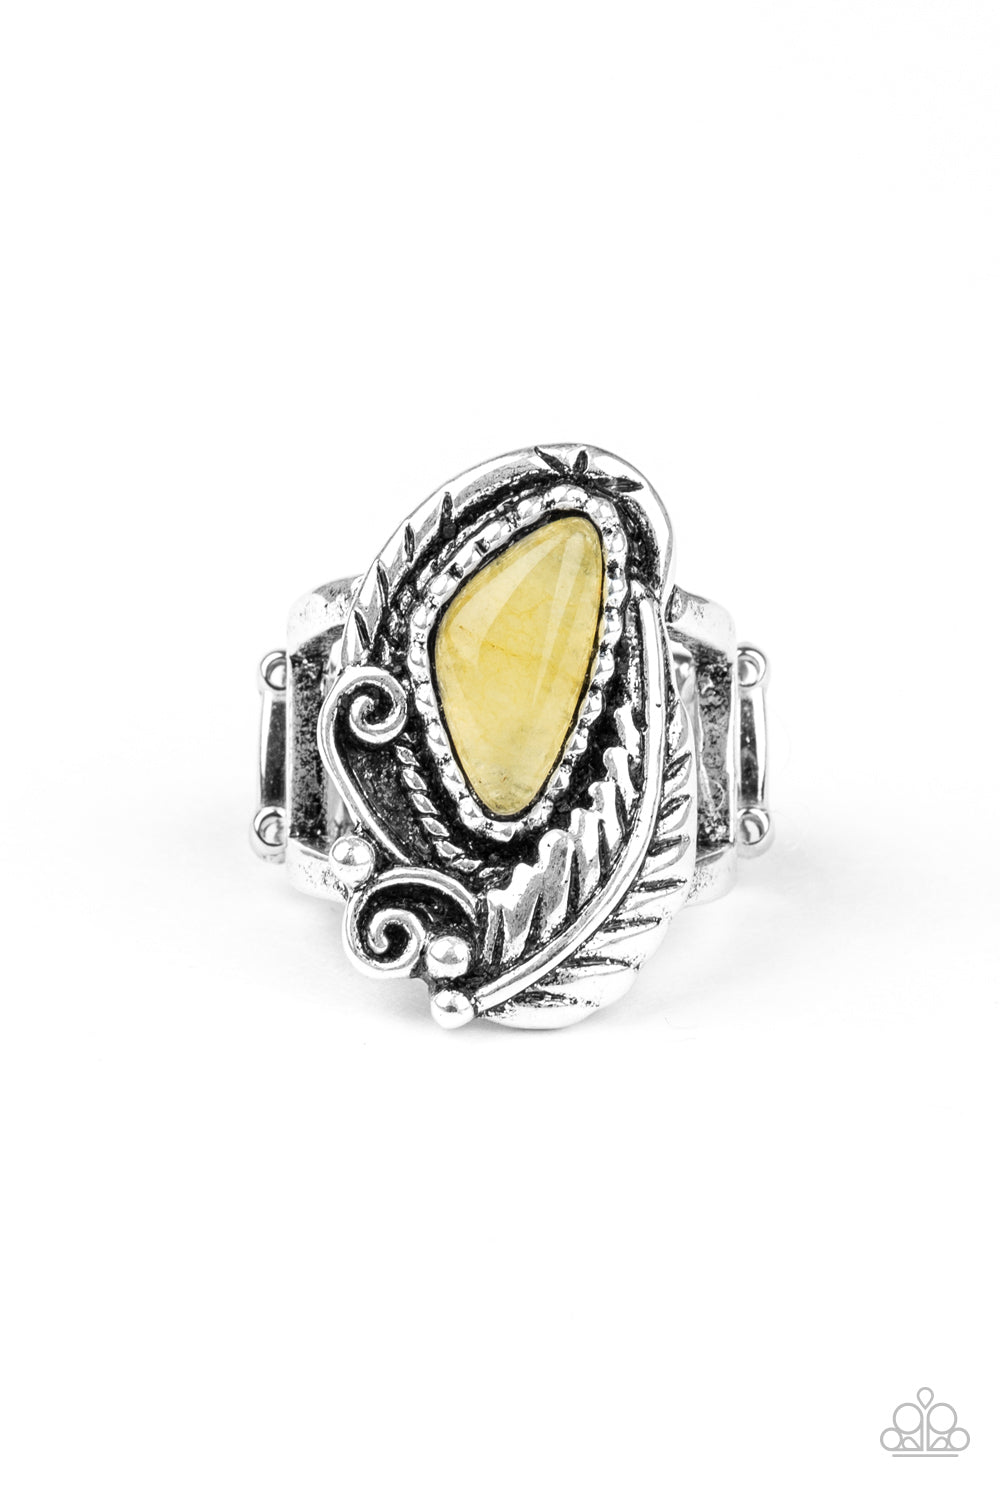 &lt;P&gt;A palm-like silver feather curls around an asymmetrical yellow stone that is nestled inside a decorative silver frame for a seasonal flair. Features a stretchy band for a flexible fit. &lt;/P&gt;  

&lt;P&gt; &lt;I&gt;  Sold as one individual ring.
&lt;/I&gt;&lt;/P&gt;

&lt;img src=\&quot;https://d9b54x484lq62.cloudfront.net/paparazzi/shopping/images/517_tag150x115_1.png\&quot; alt=\&quot;New Kit\&quot; align=\&quot;middle\&quot; height=\&quot;50\&quot; width=\&quot;50\&quot;/&gt;